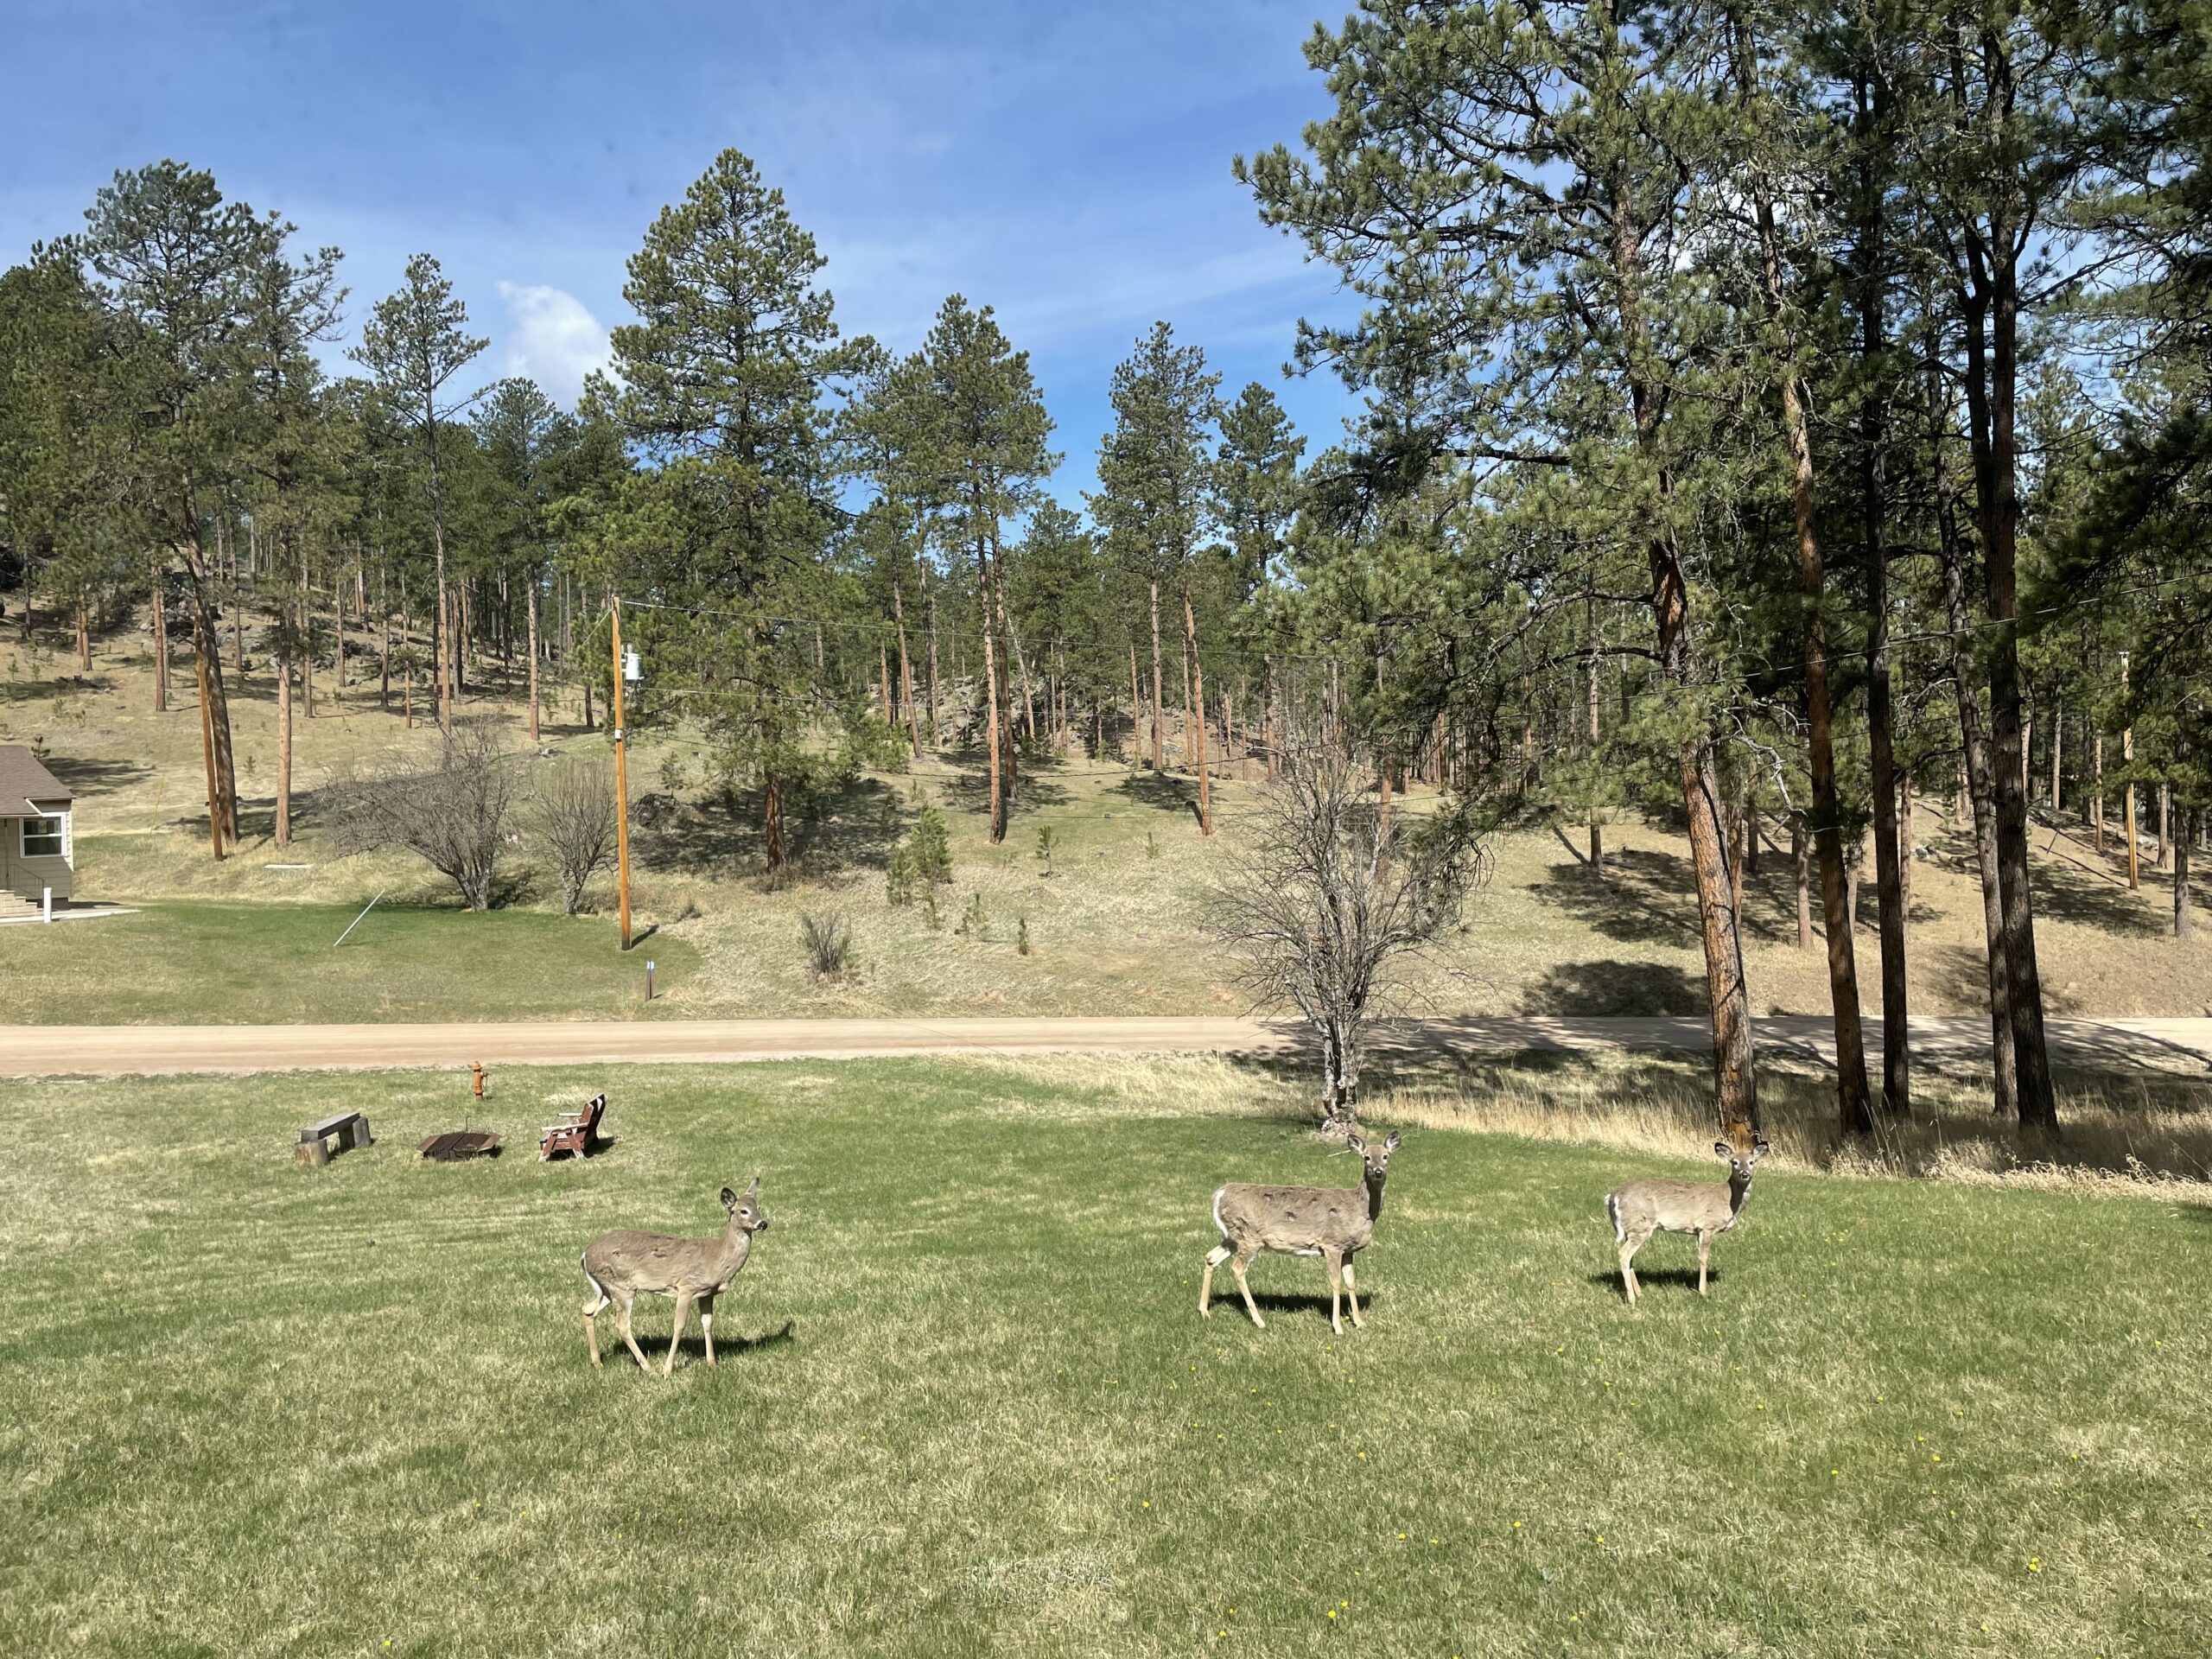 Three white-tailed deer in a lawn surrounded by ponderosa pines look towards the camera. 